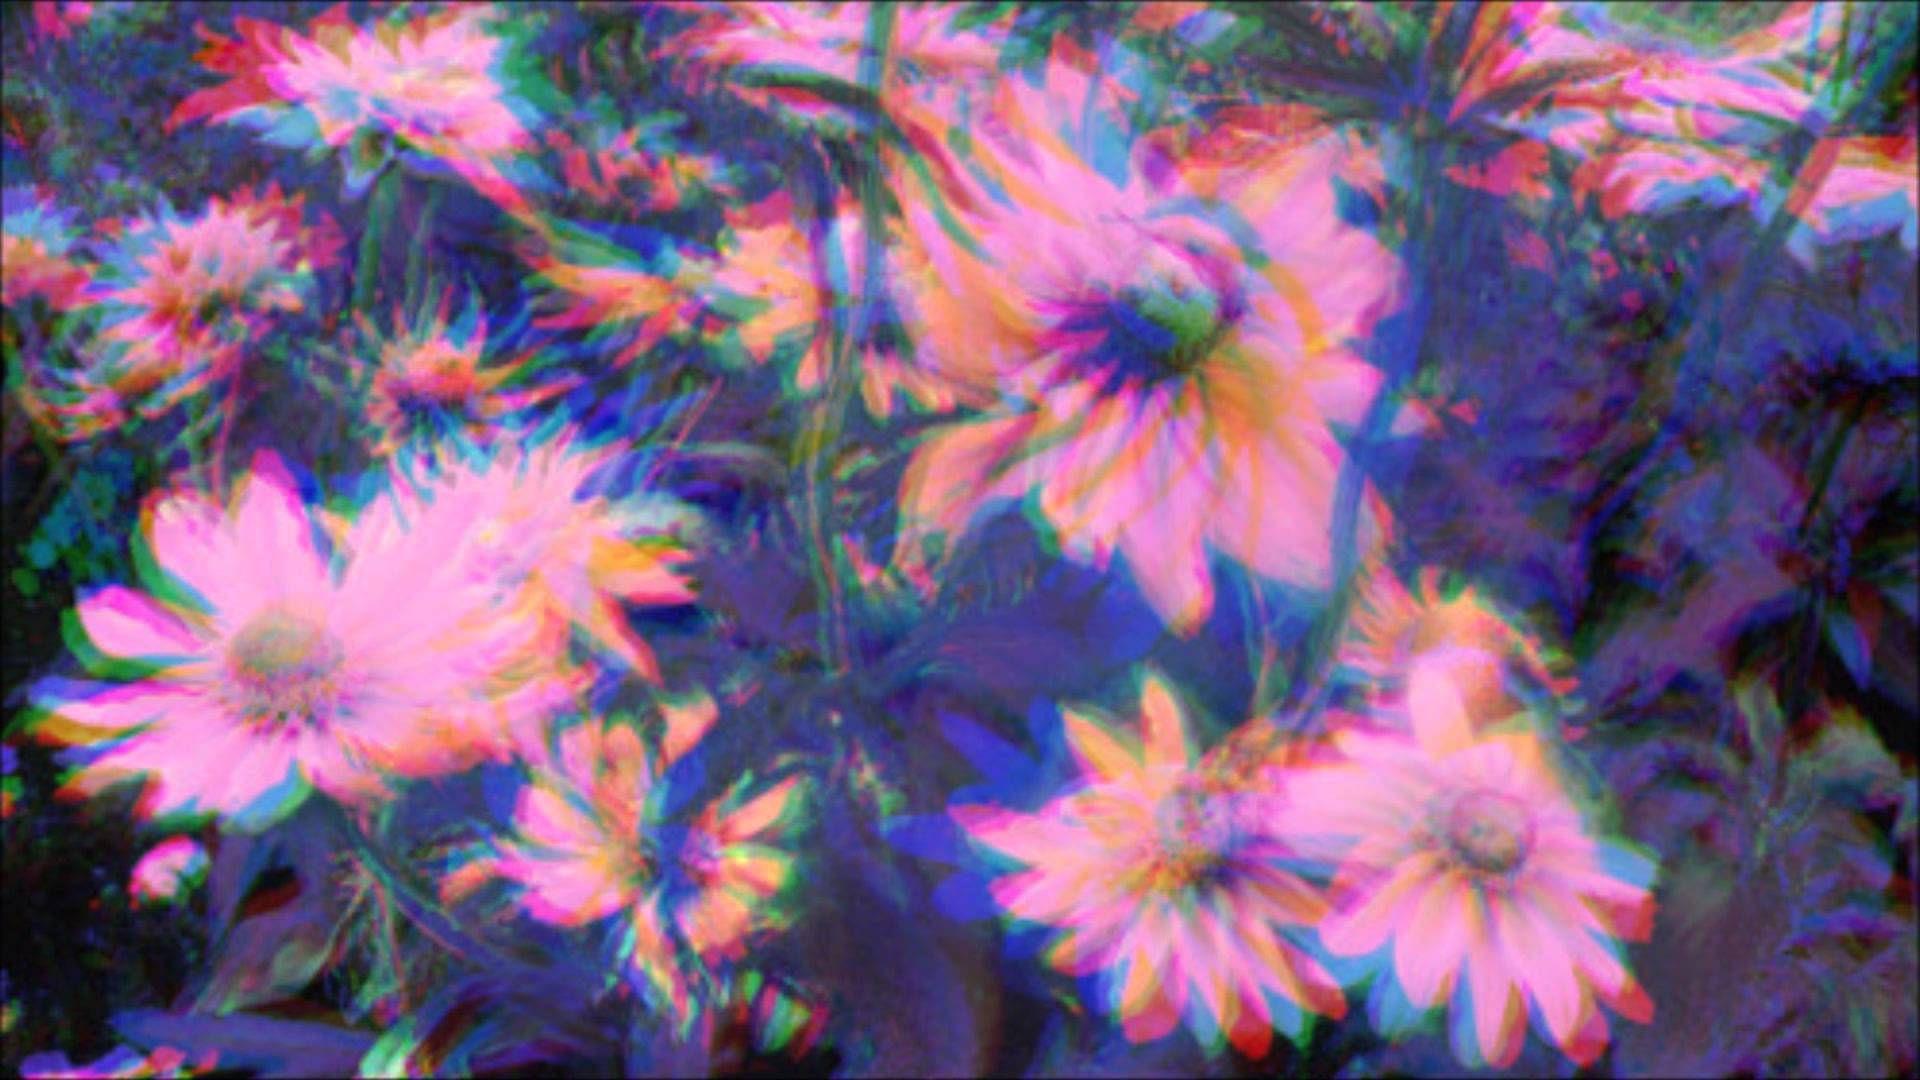 trippy background tumblr 9. Background Check All